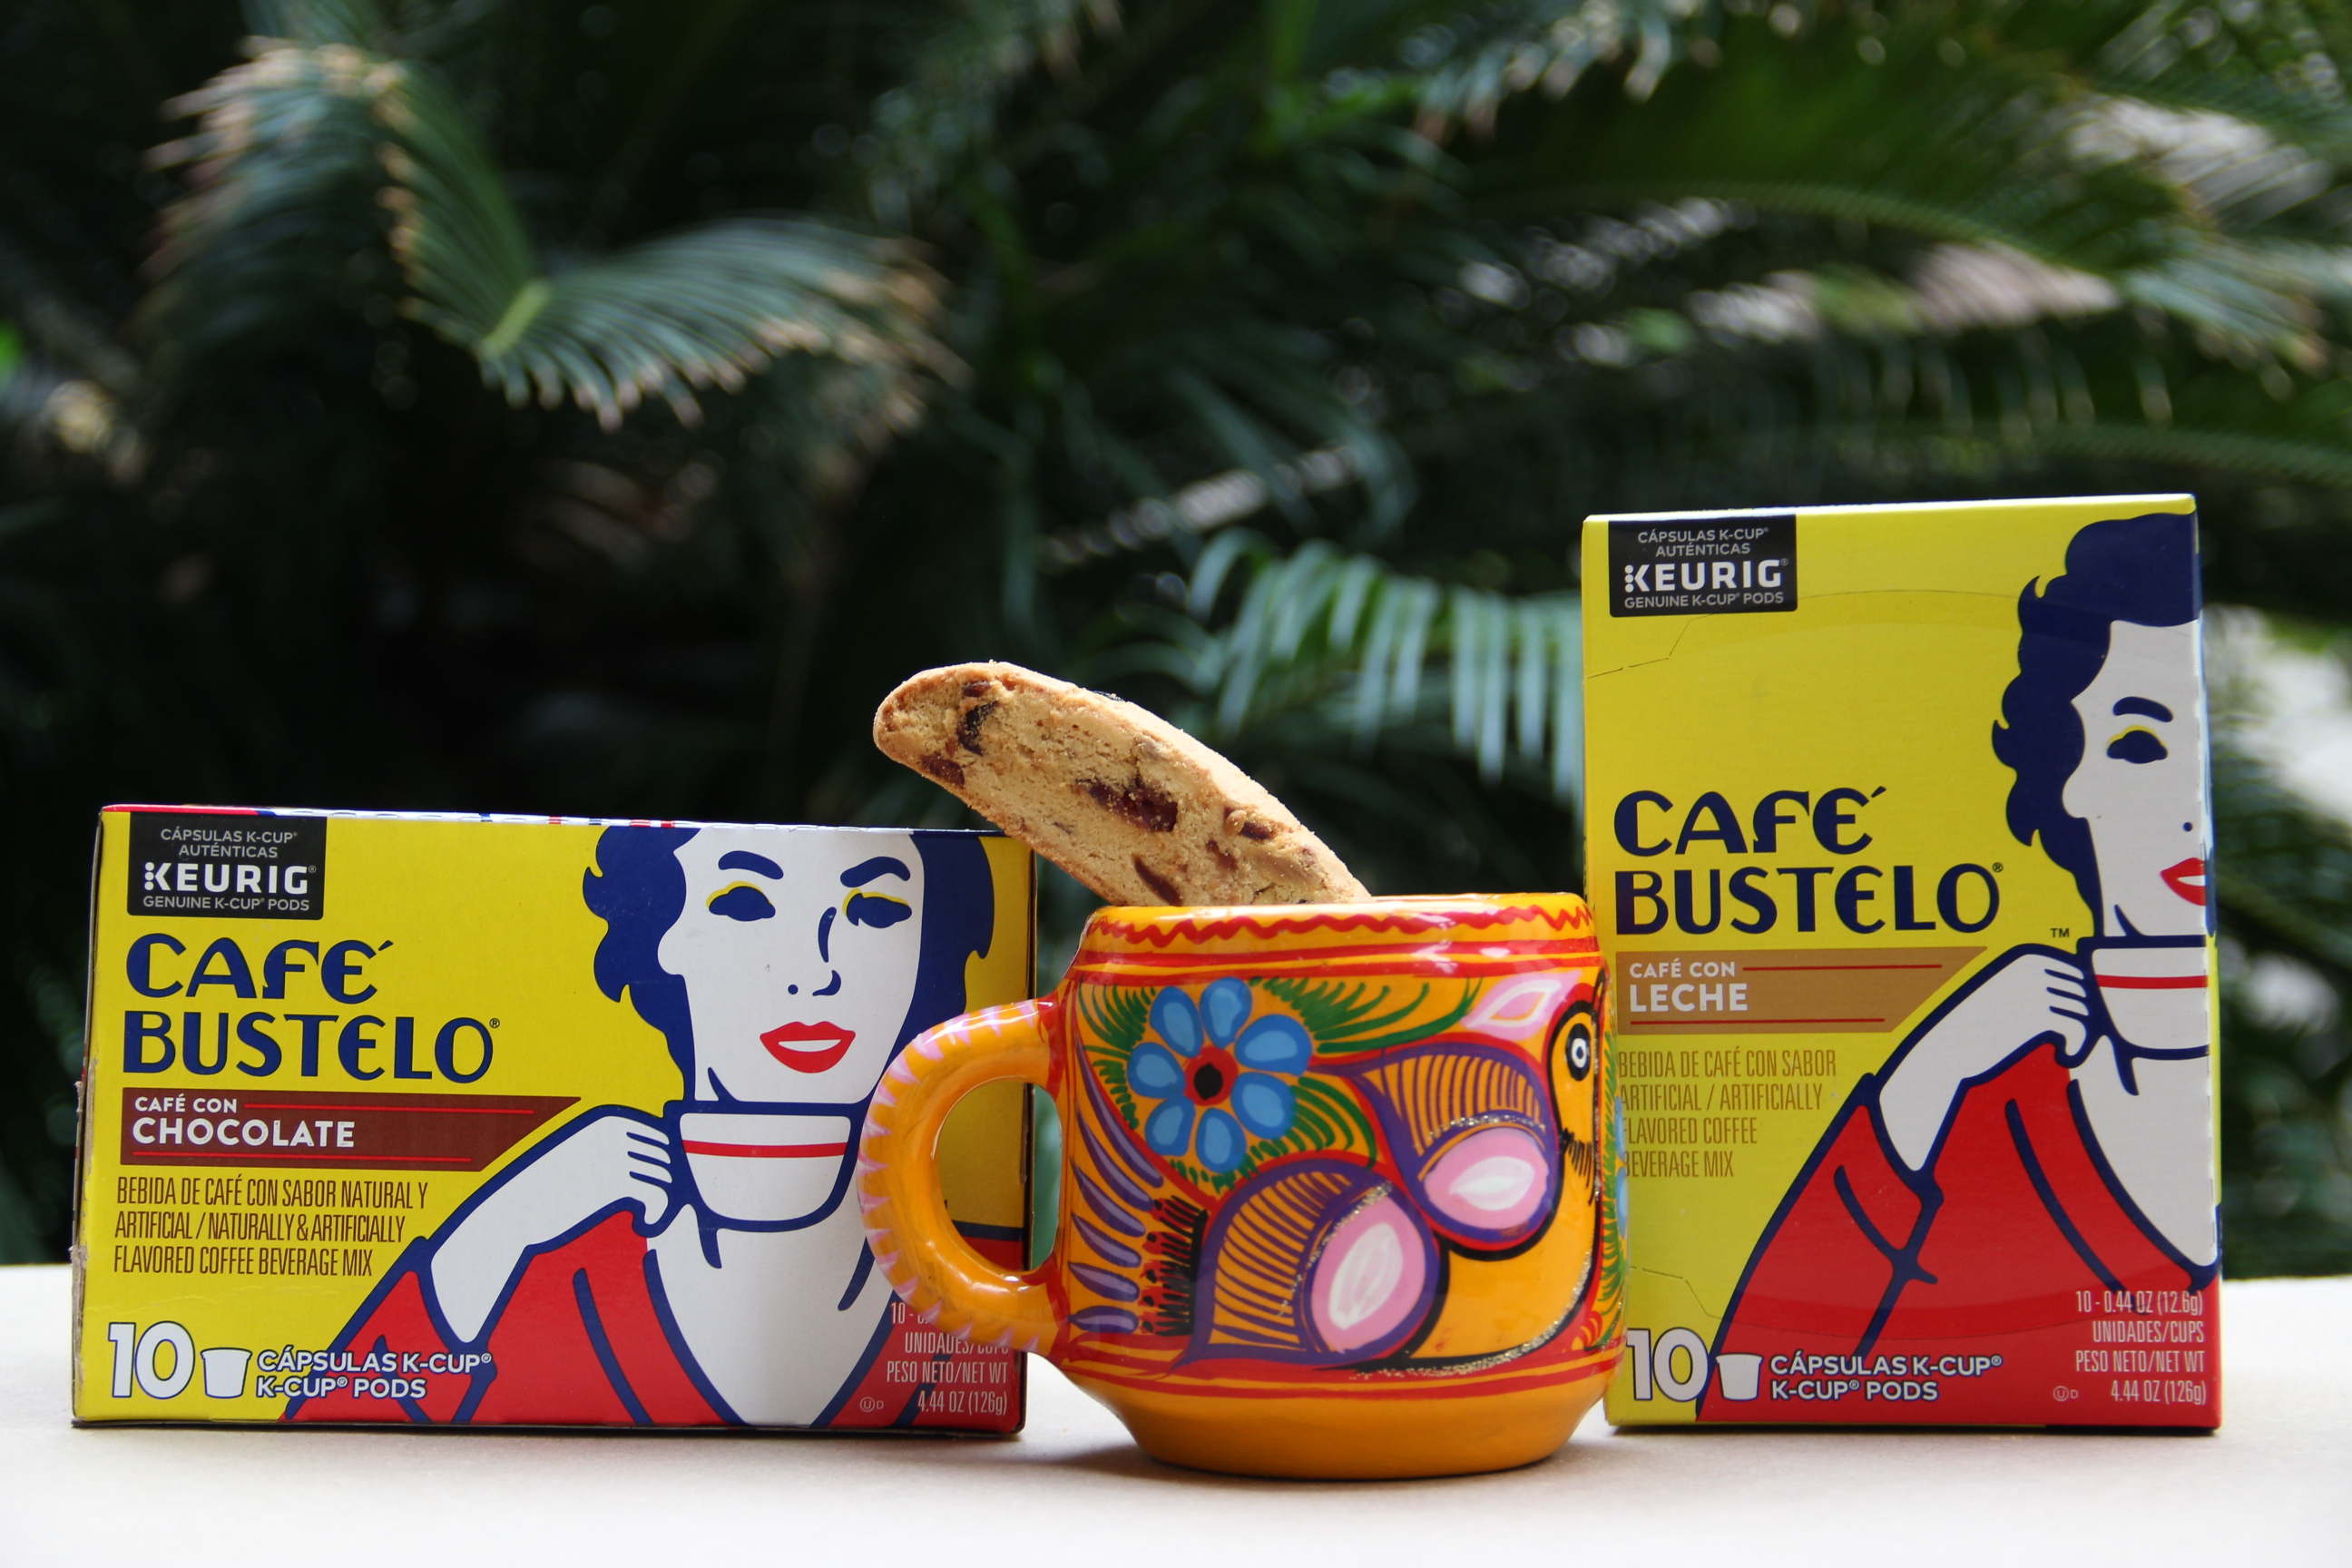 Who is father of cafe bustelo?